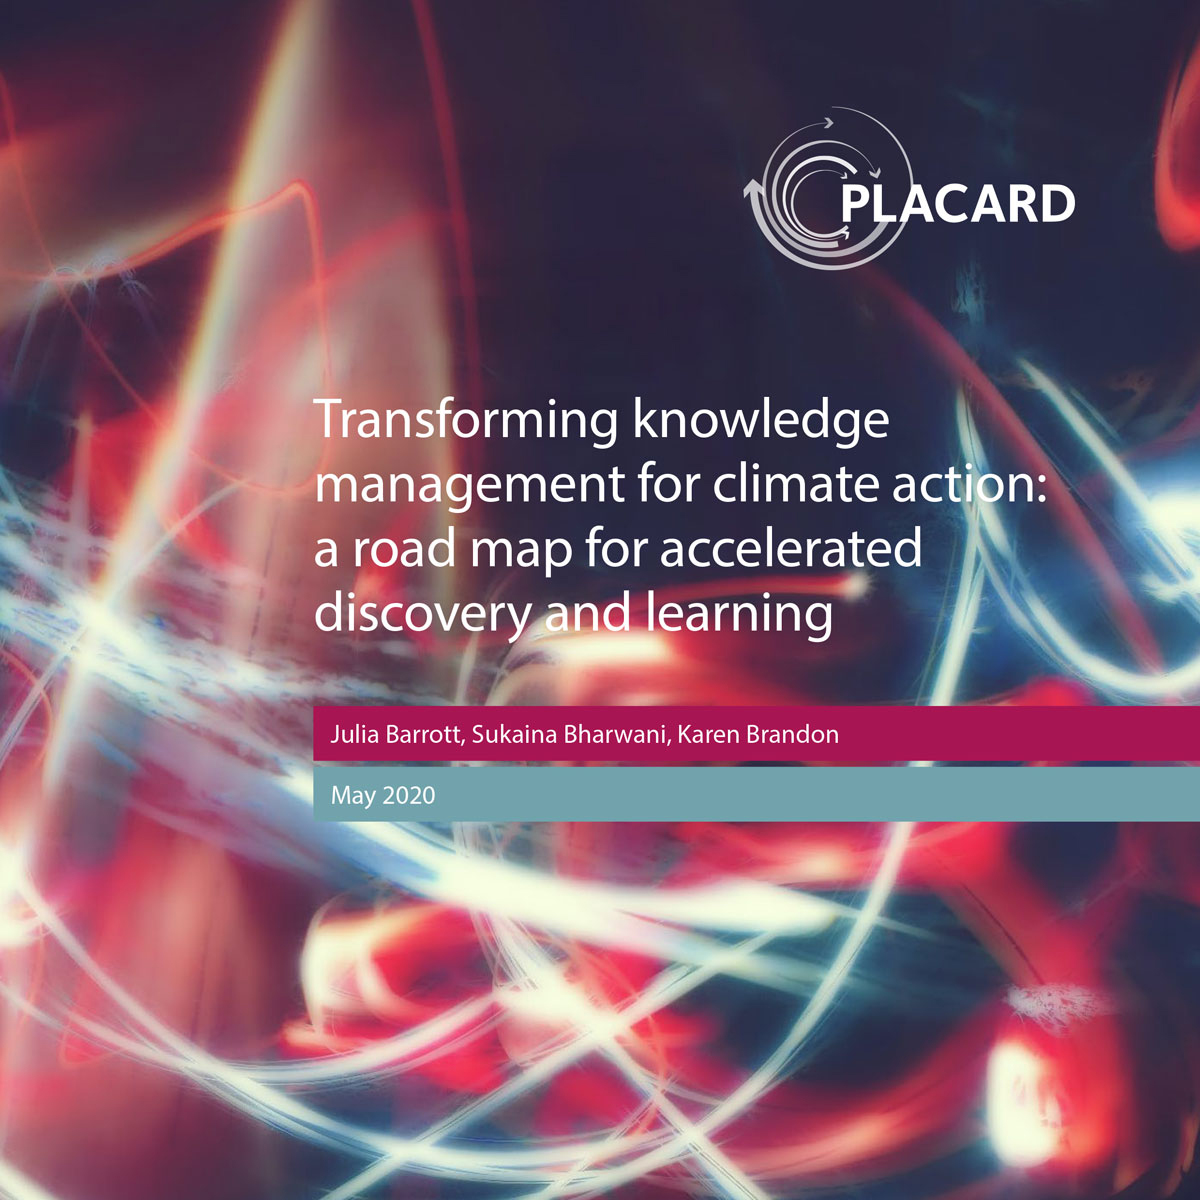 Cover of the PLACARD Transforming knowledge management for climate action report